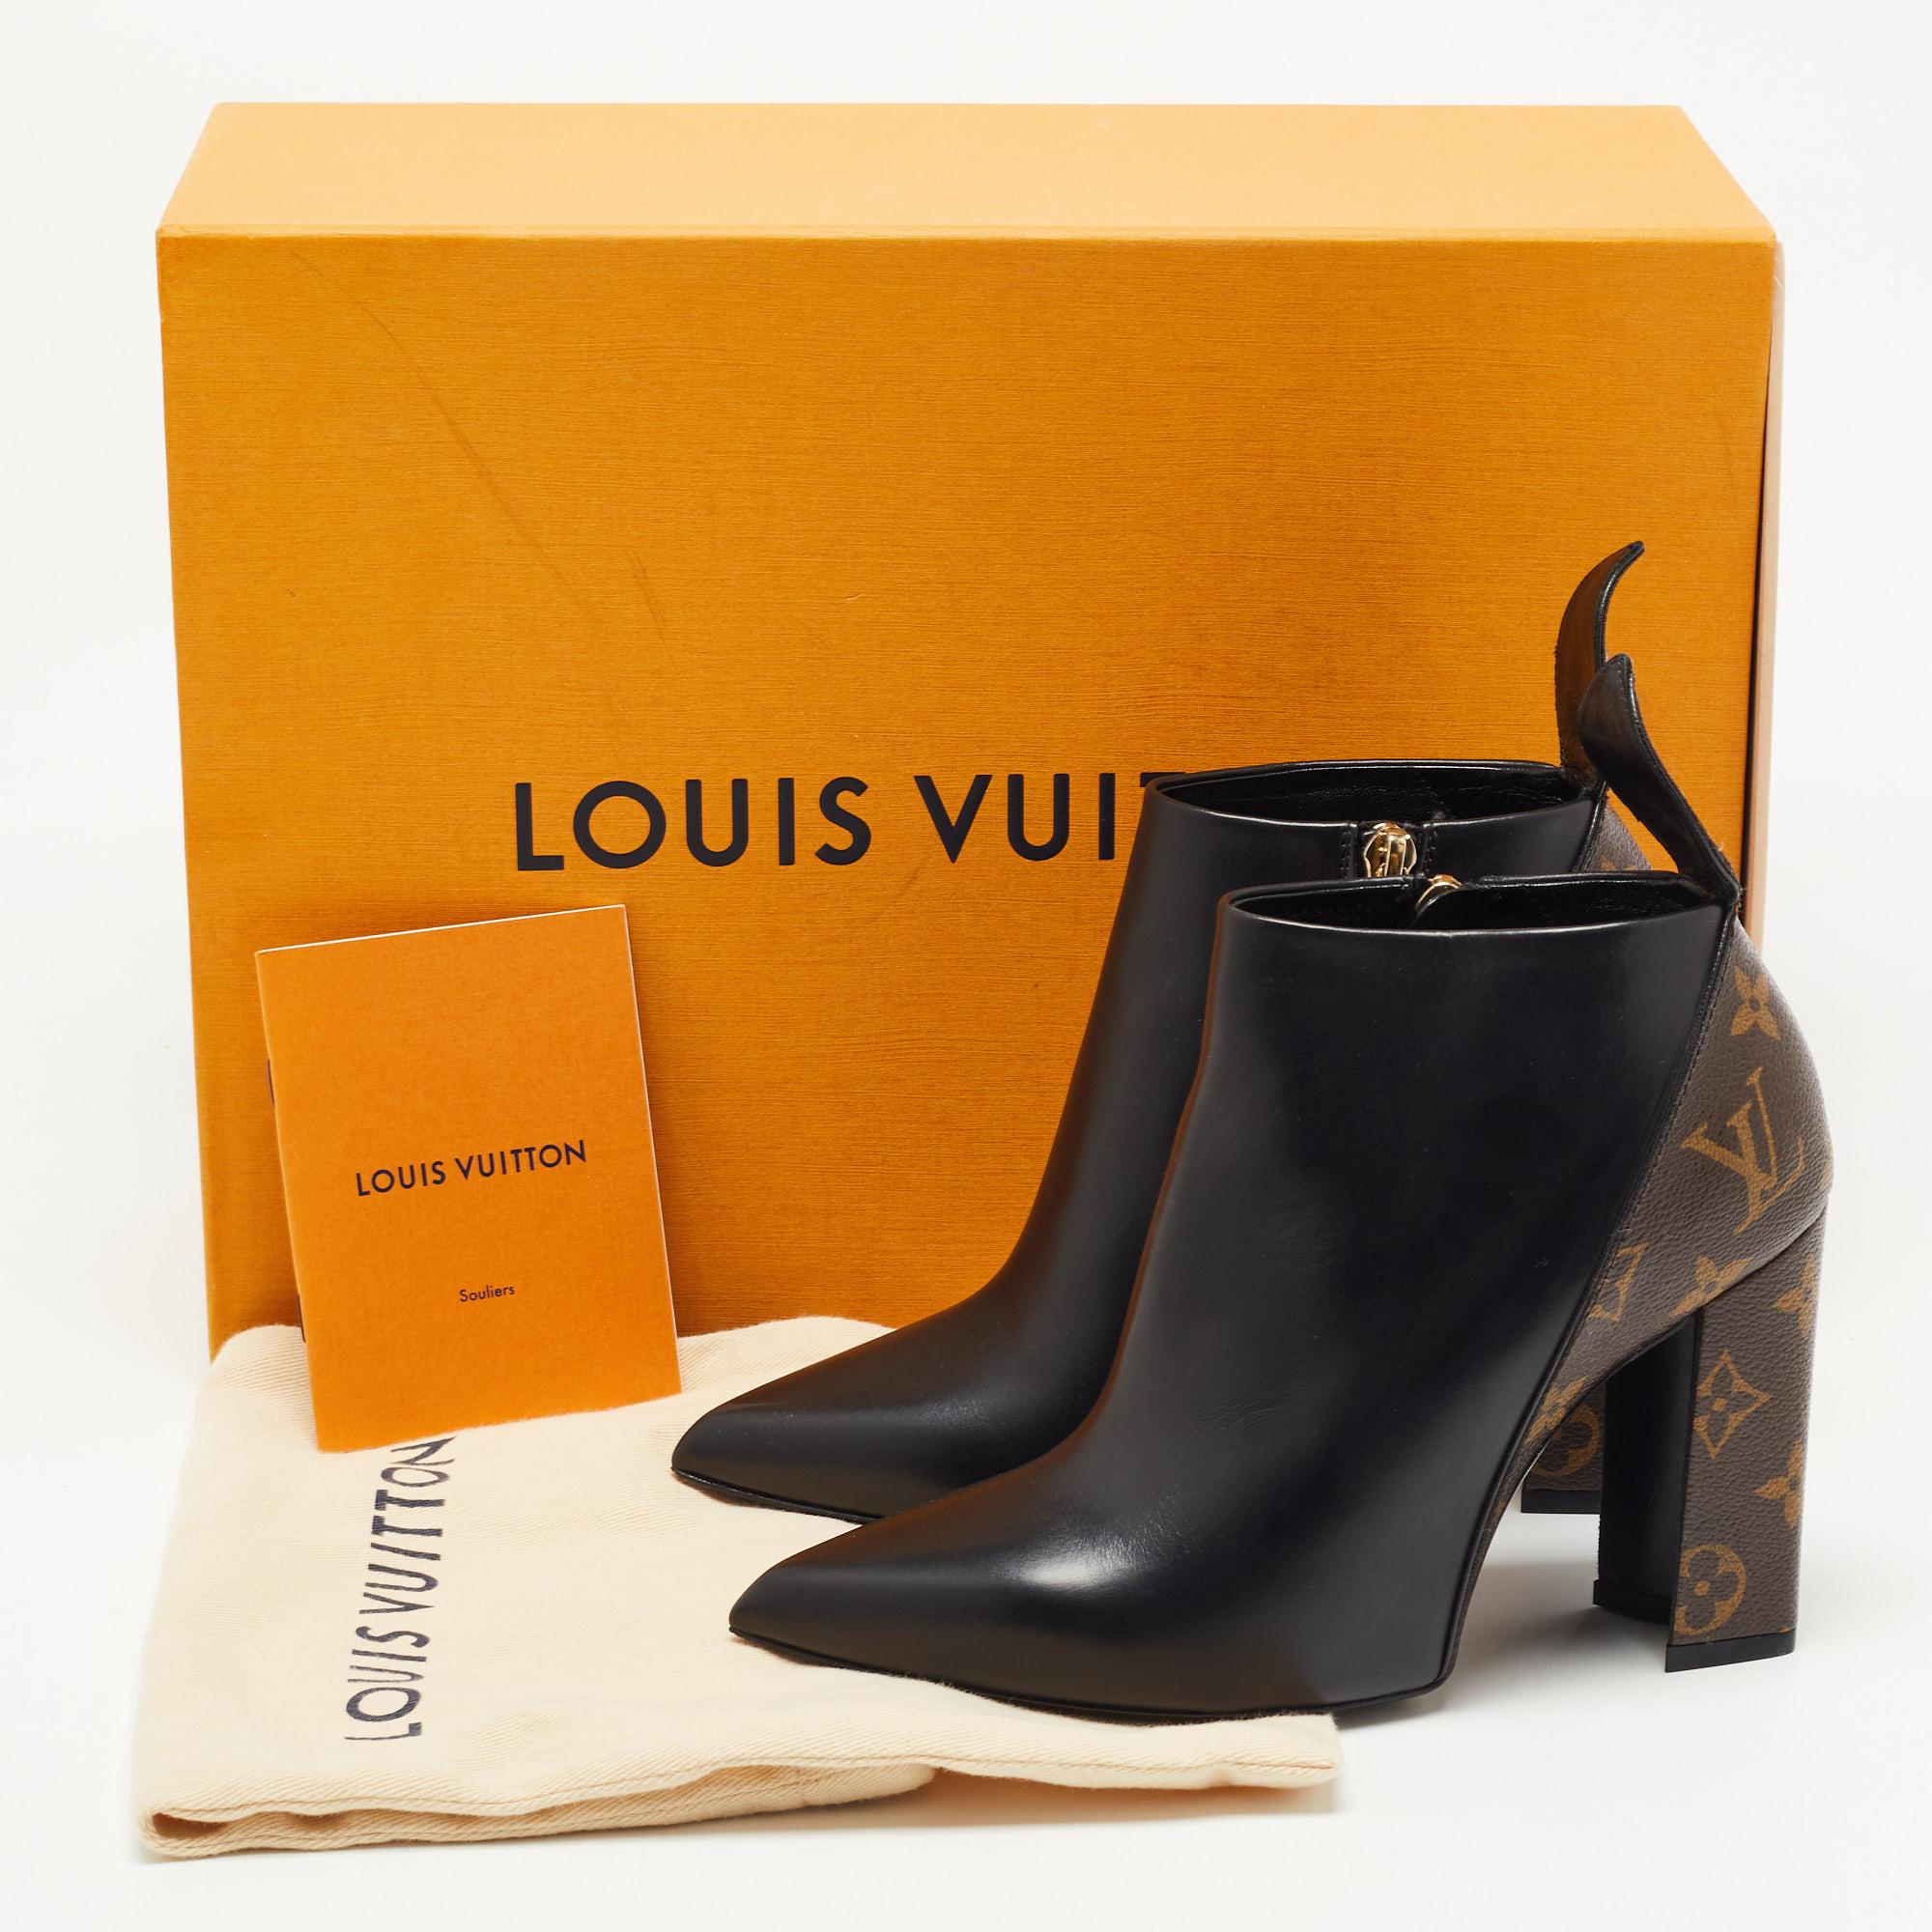 Louis Vuitton Monogram Canvas and Leather Rodeo Queen Ankle Boots Size 36 4